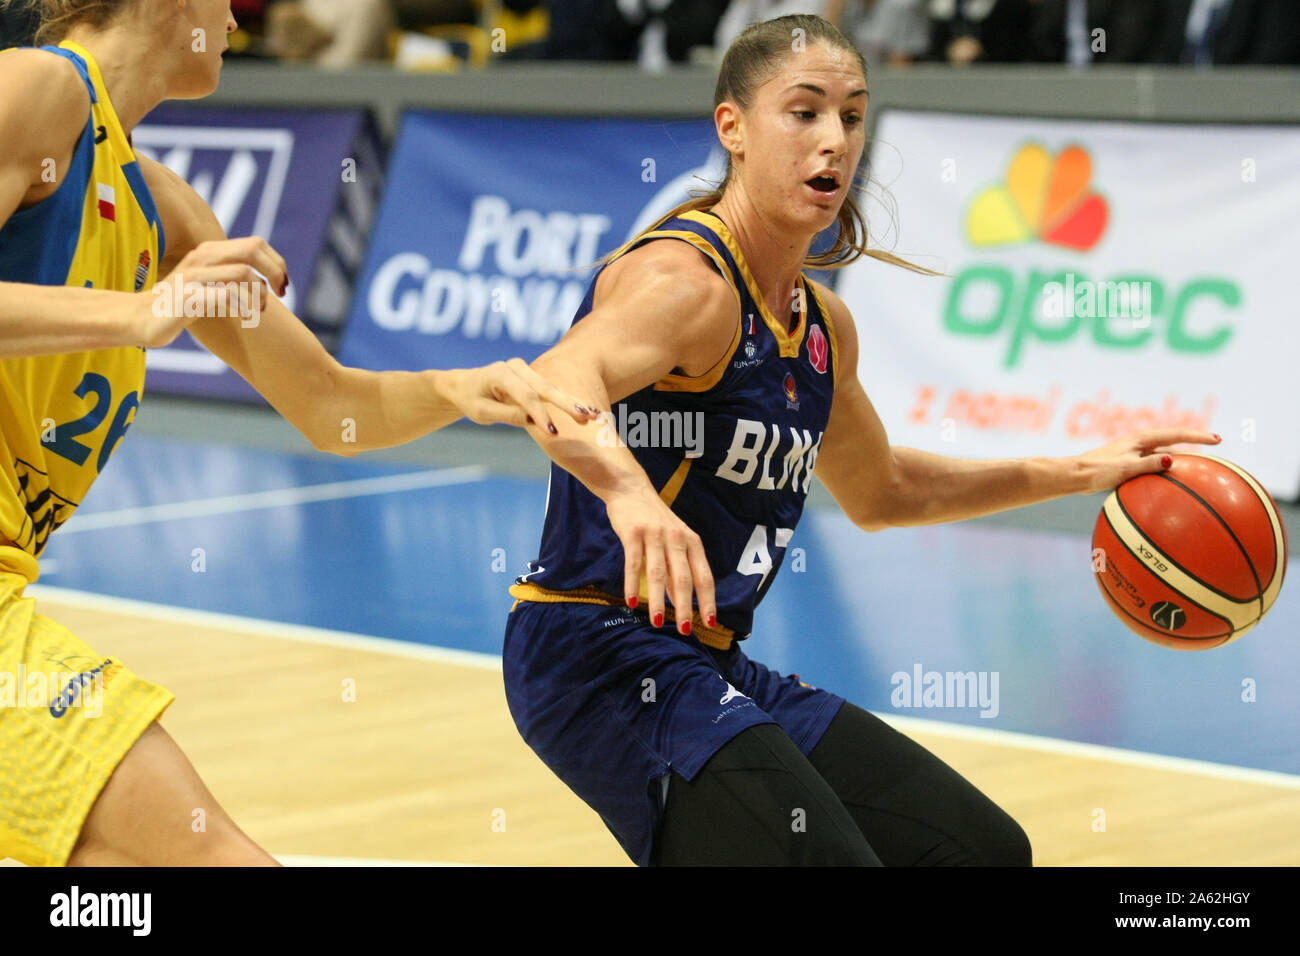 Gdynia, Poland. , . Romane Bernies (47) of BLMA is seen in action during  Euroleague woman basketball game between Arka Gdynia (Poland) and Basket  Lattes Montpellier Association (France) in Gdynia, Poland on